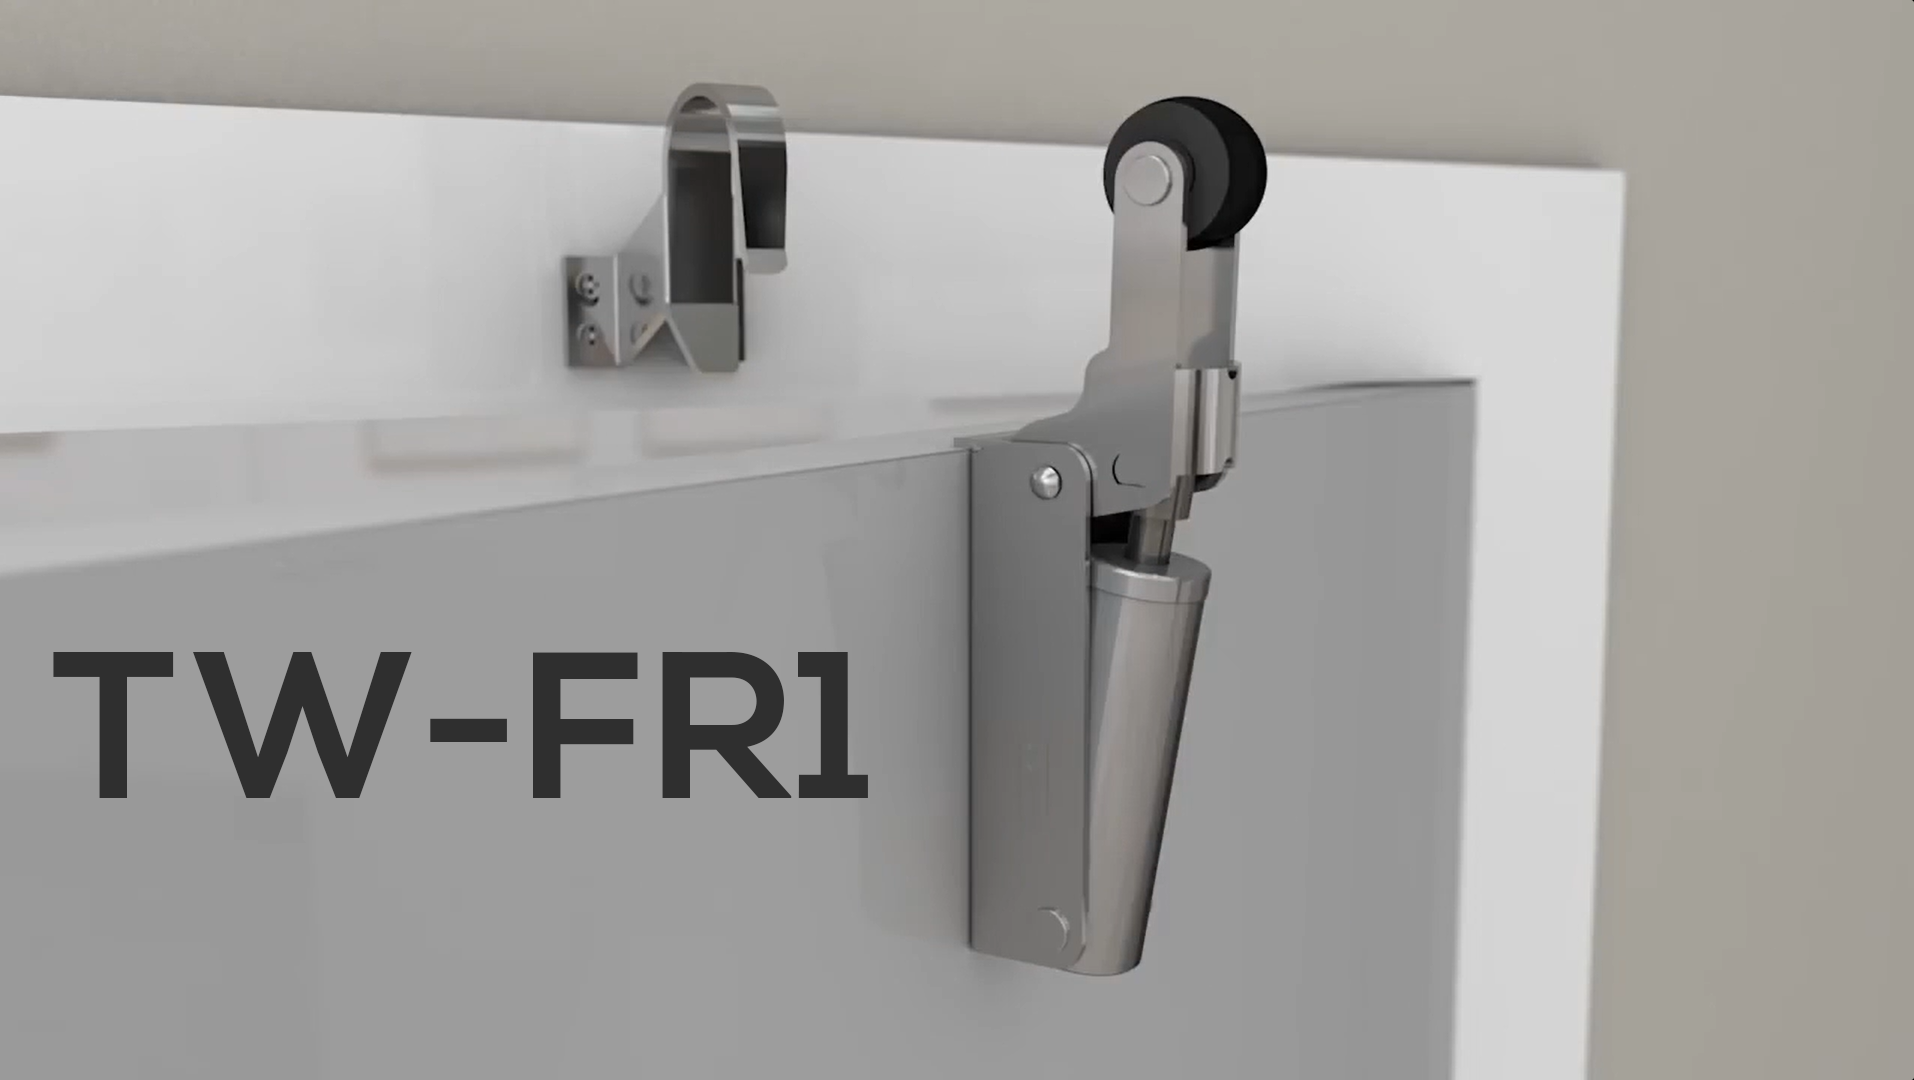 TW-FR1 - Presentation and Installation of Hydraulic Door Stopper